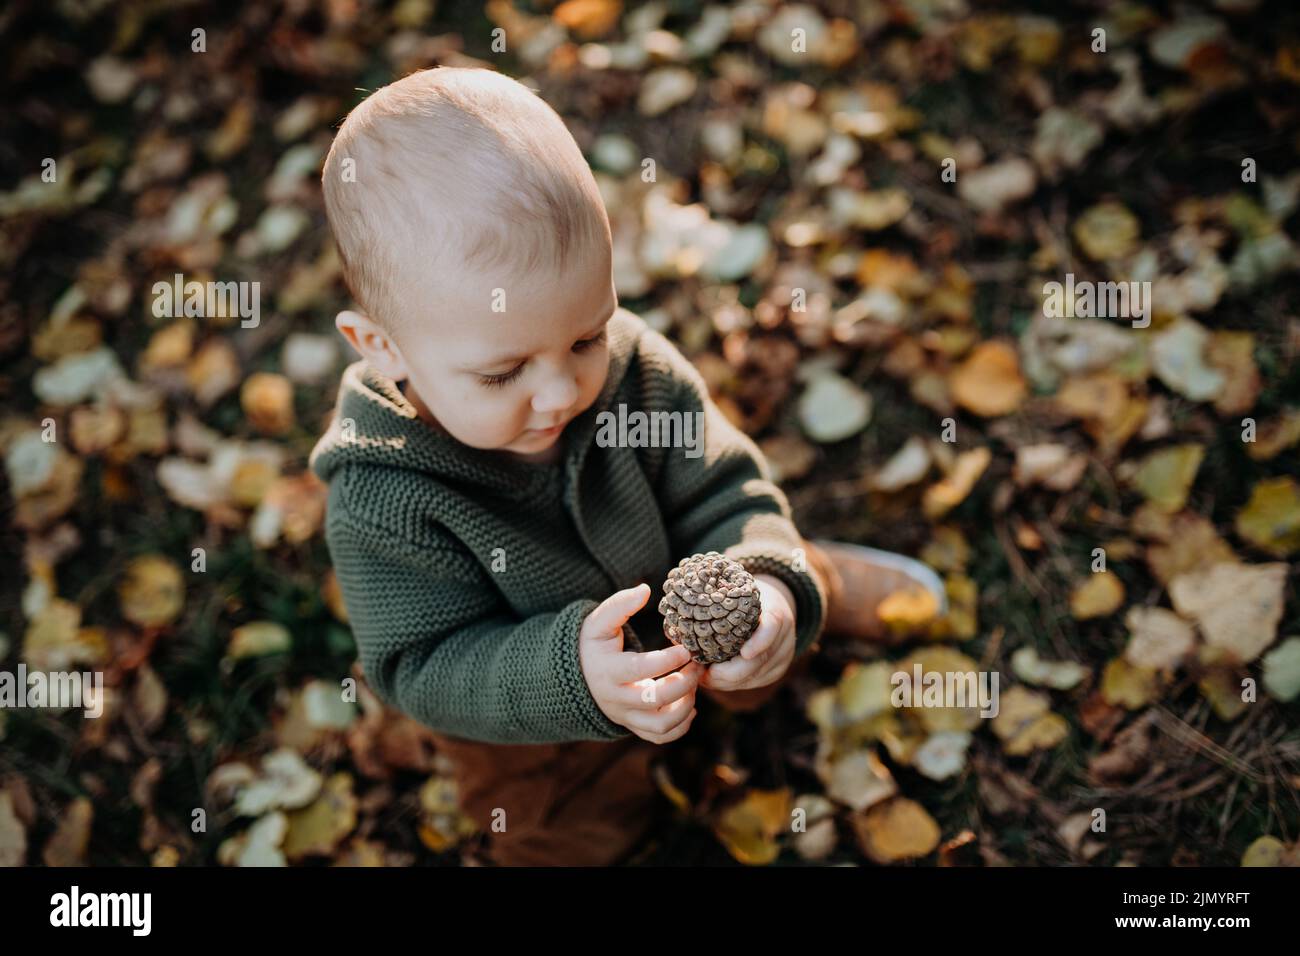 Little toddler boy exploring nature and holding pine cone outdoors in autumn forest. Stock Photo